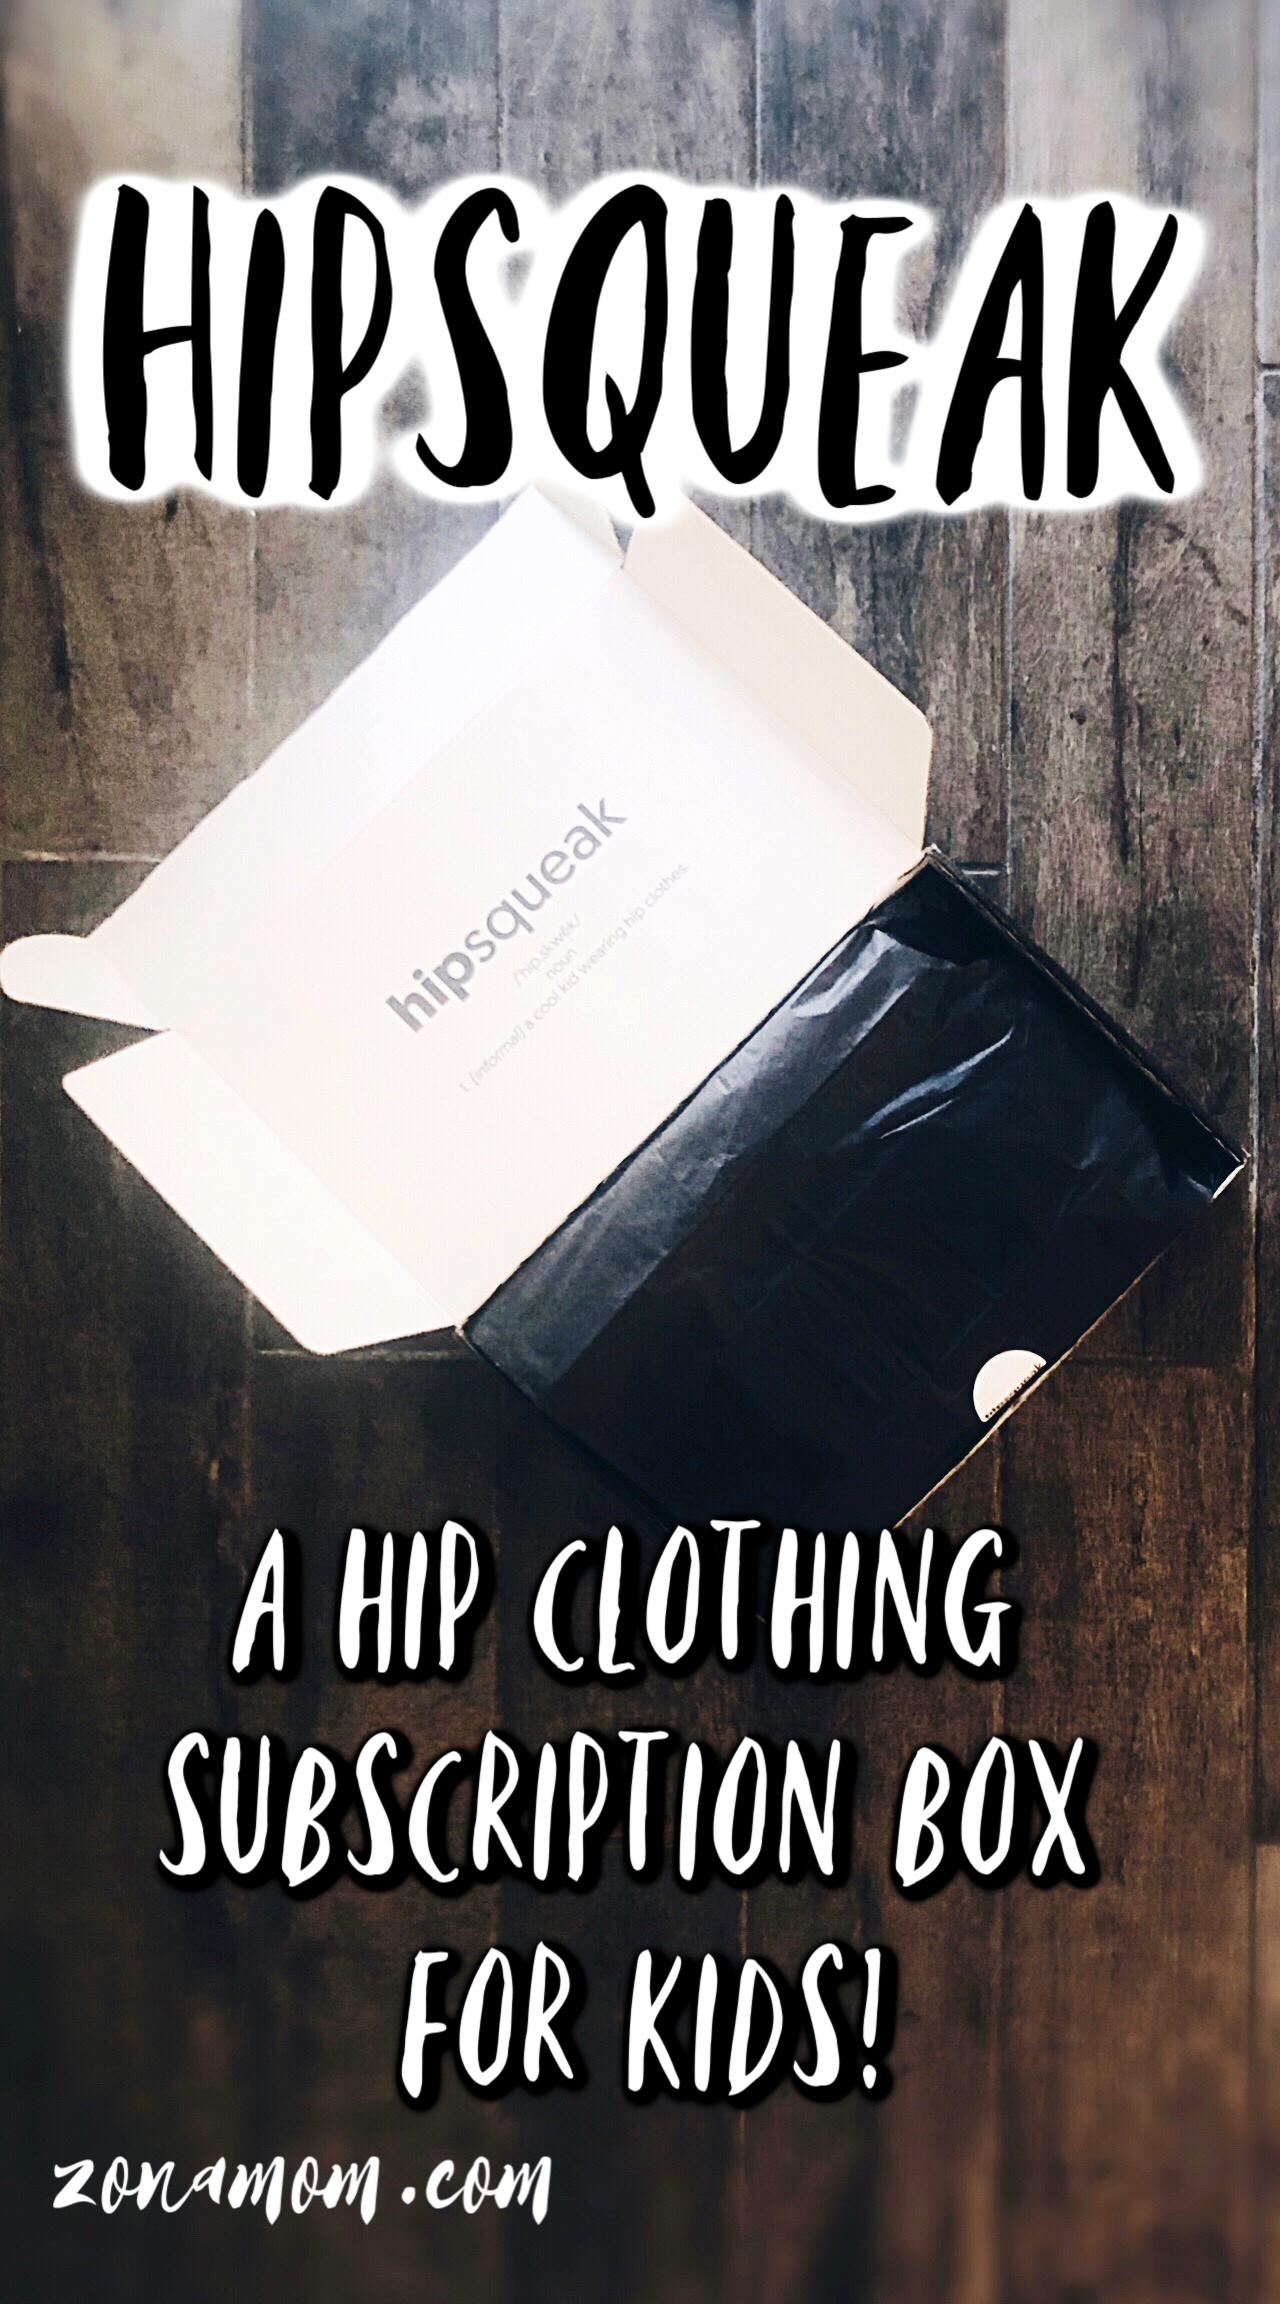 Hipsqueak Box | Kids Clothing Subscription Box | Hip Kids Clothing | Subscription Box | Subscription Box Gift | Baby Shower Gift | Baby Gift | Kids Gift Ideas | Kids Clothing Budget | Affordable Children Clothing | Subscription Box Review | Unboxing video